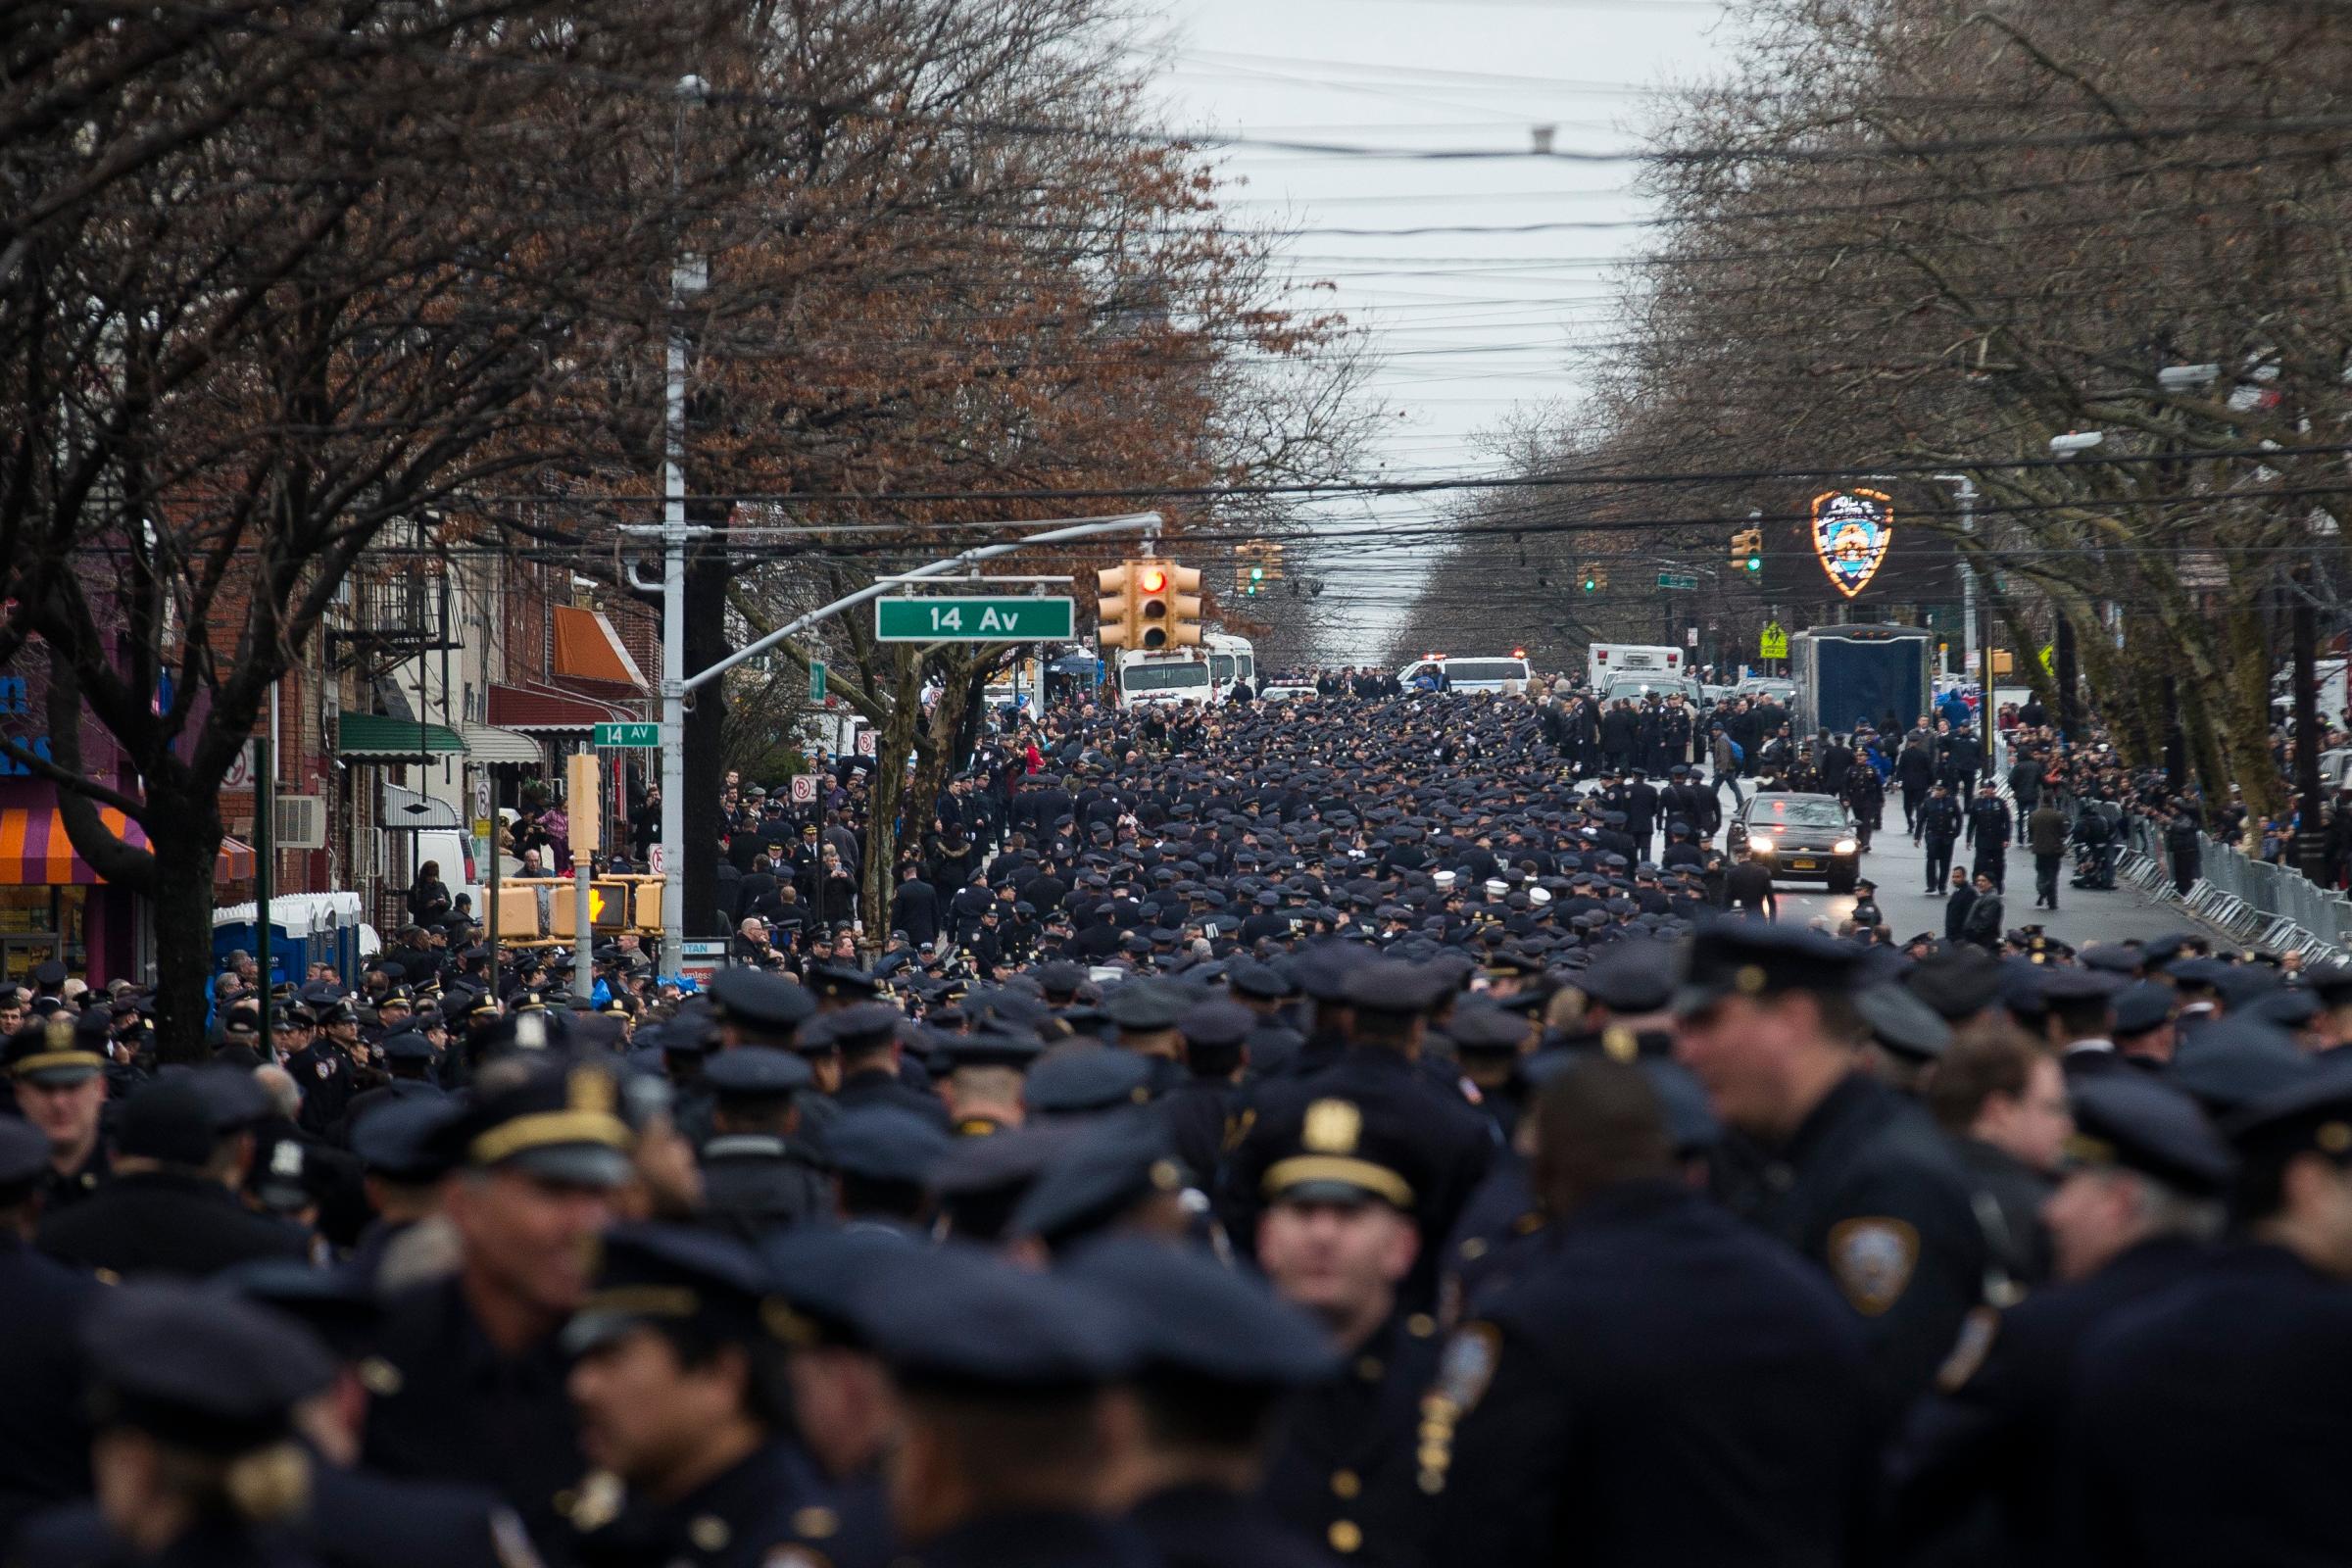 Police officers from across the country gather for the funeral of New York Police Department Officer Wenjian Liu at Aievoli Funeral Home on Jan. 4, 2015, in the Brooklyn borough of New York.